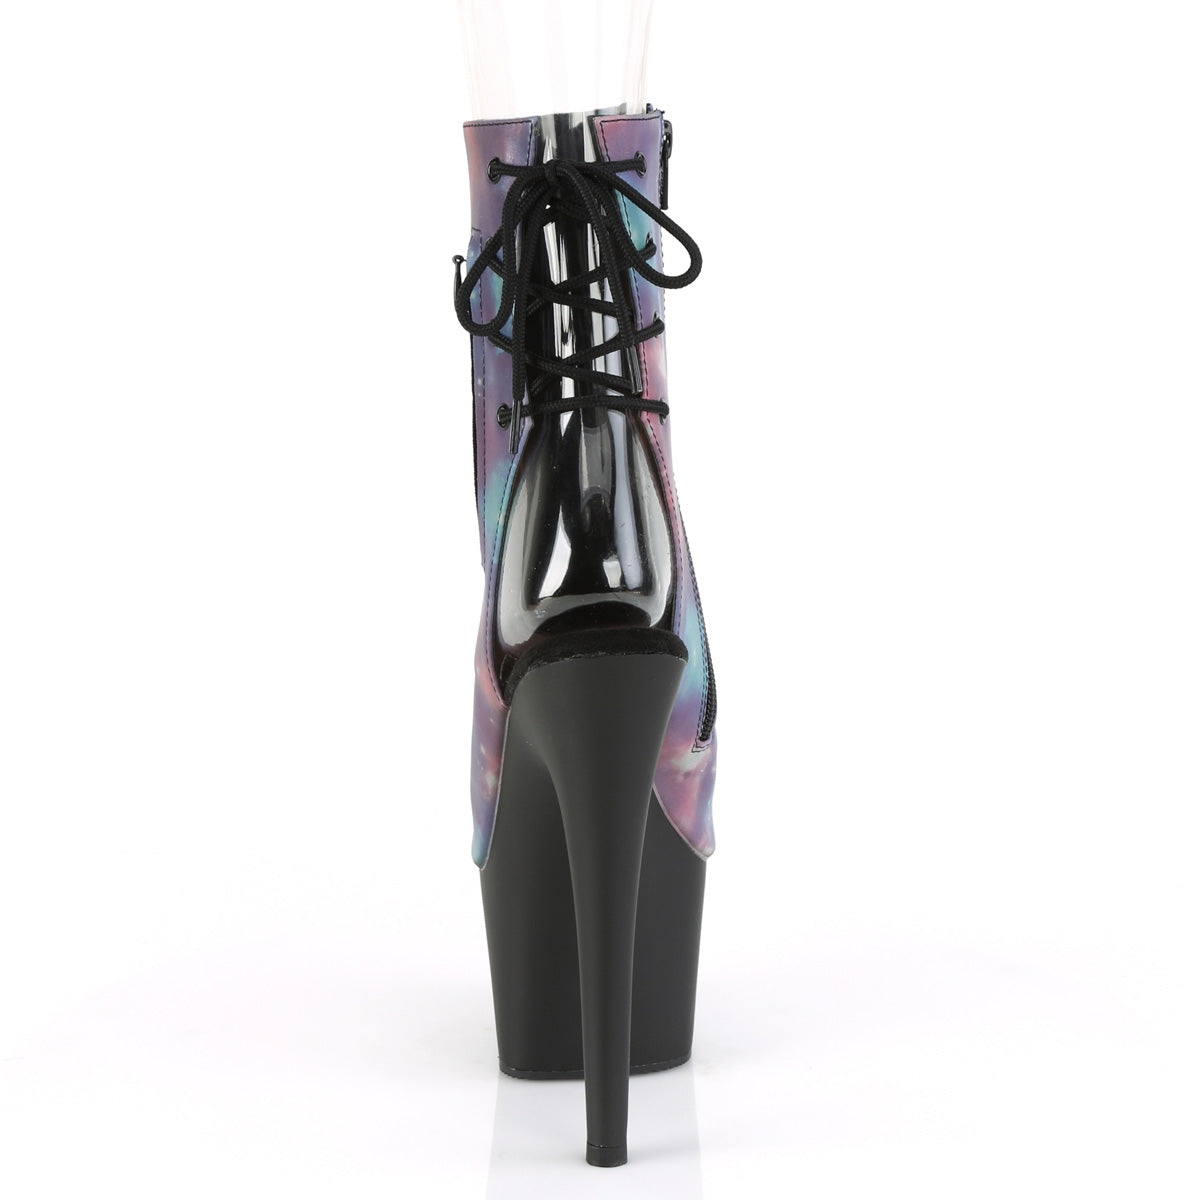 ADORE-1018REFL Pleasers 7" Heel Purple Strippers Ankle Boots-Pleaser- Sexy Shoes Fetish Footwear